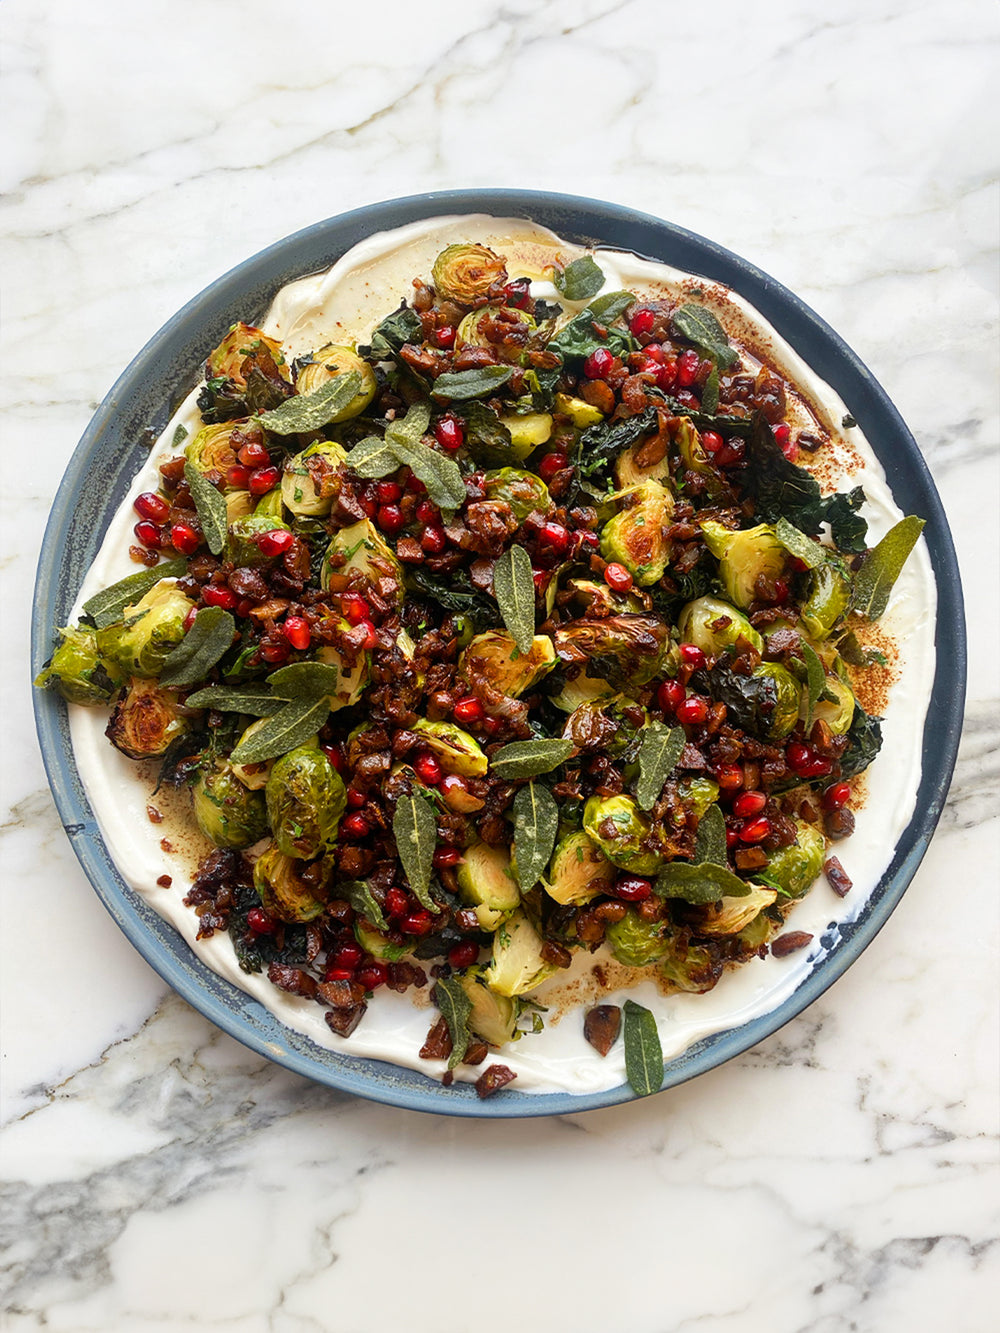 Roasted Brussels sprouts with cinnamon-butter yoghurt and chestnuts